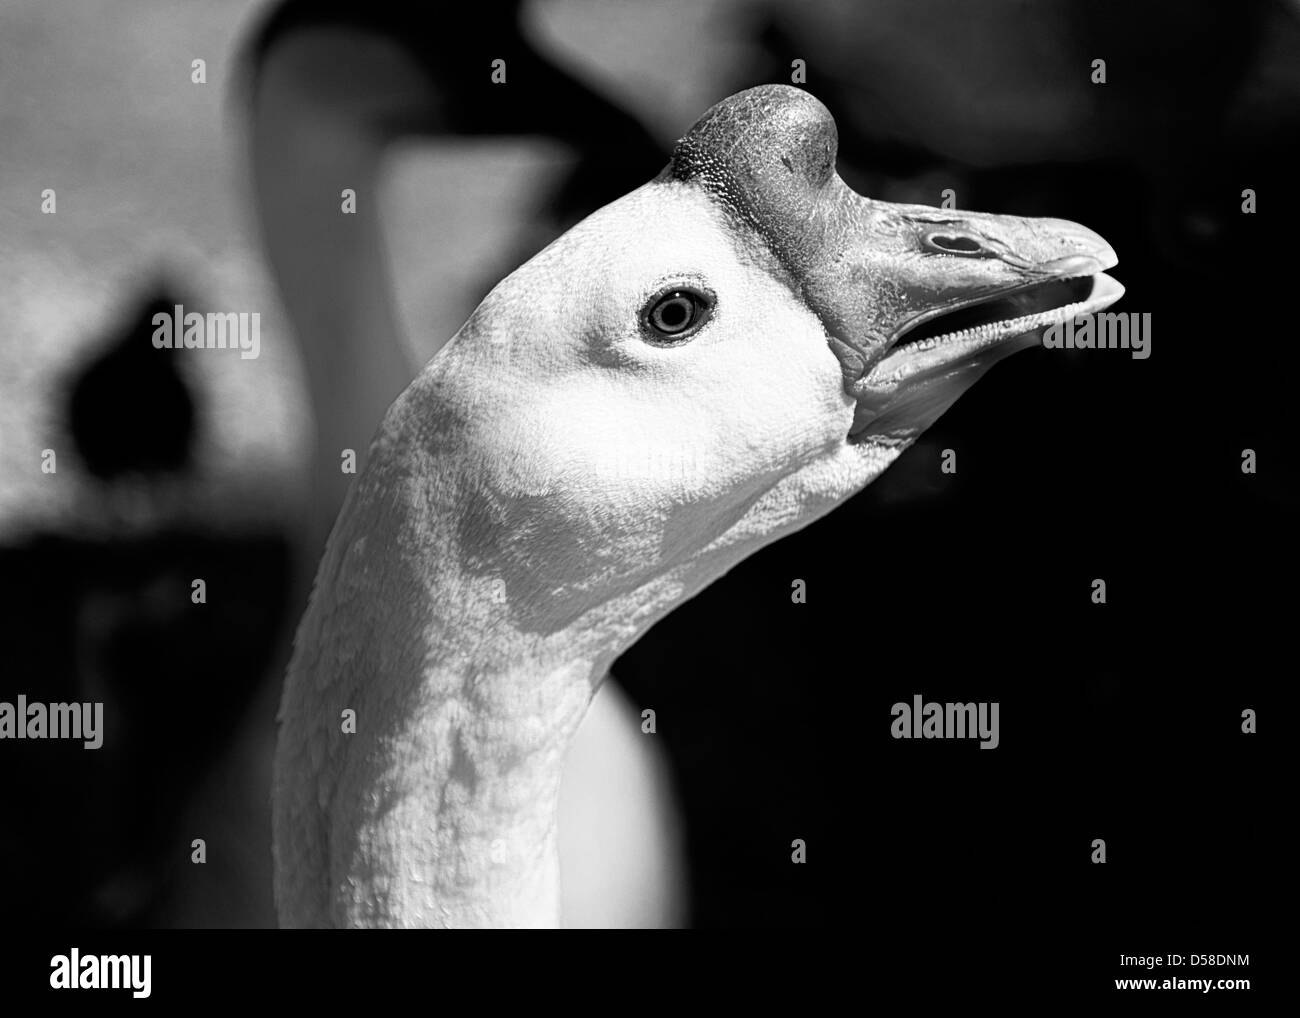 Chinese geese are domesticated versions descended from wild Swan Geese.  This goose is most likely a male. Stock Photo